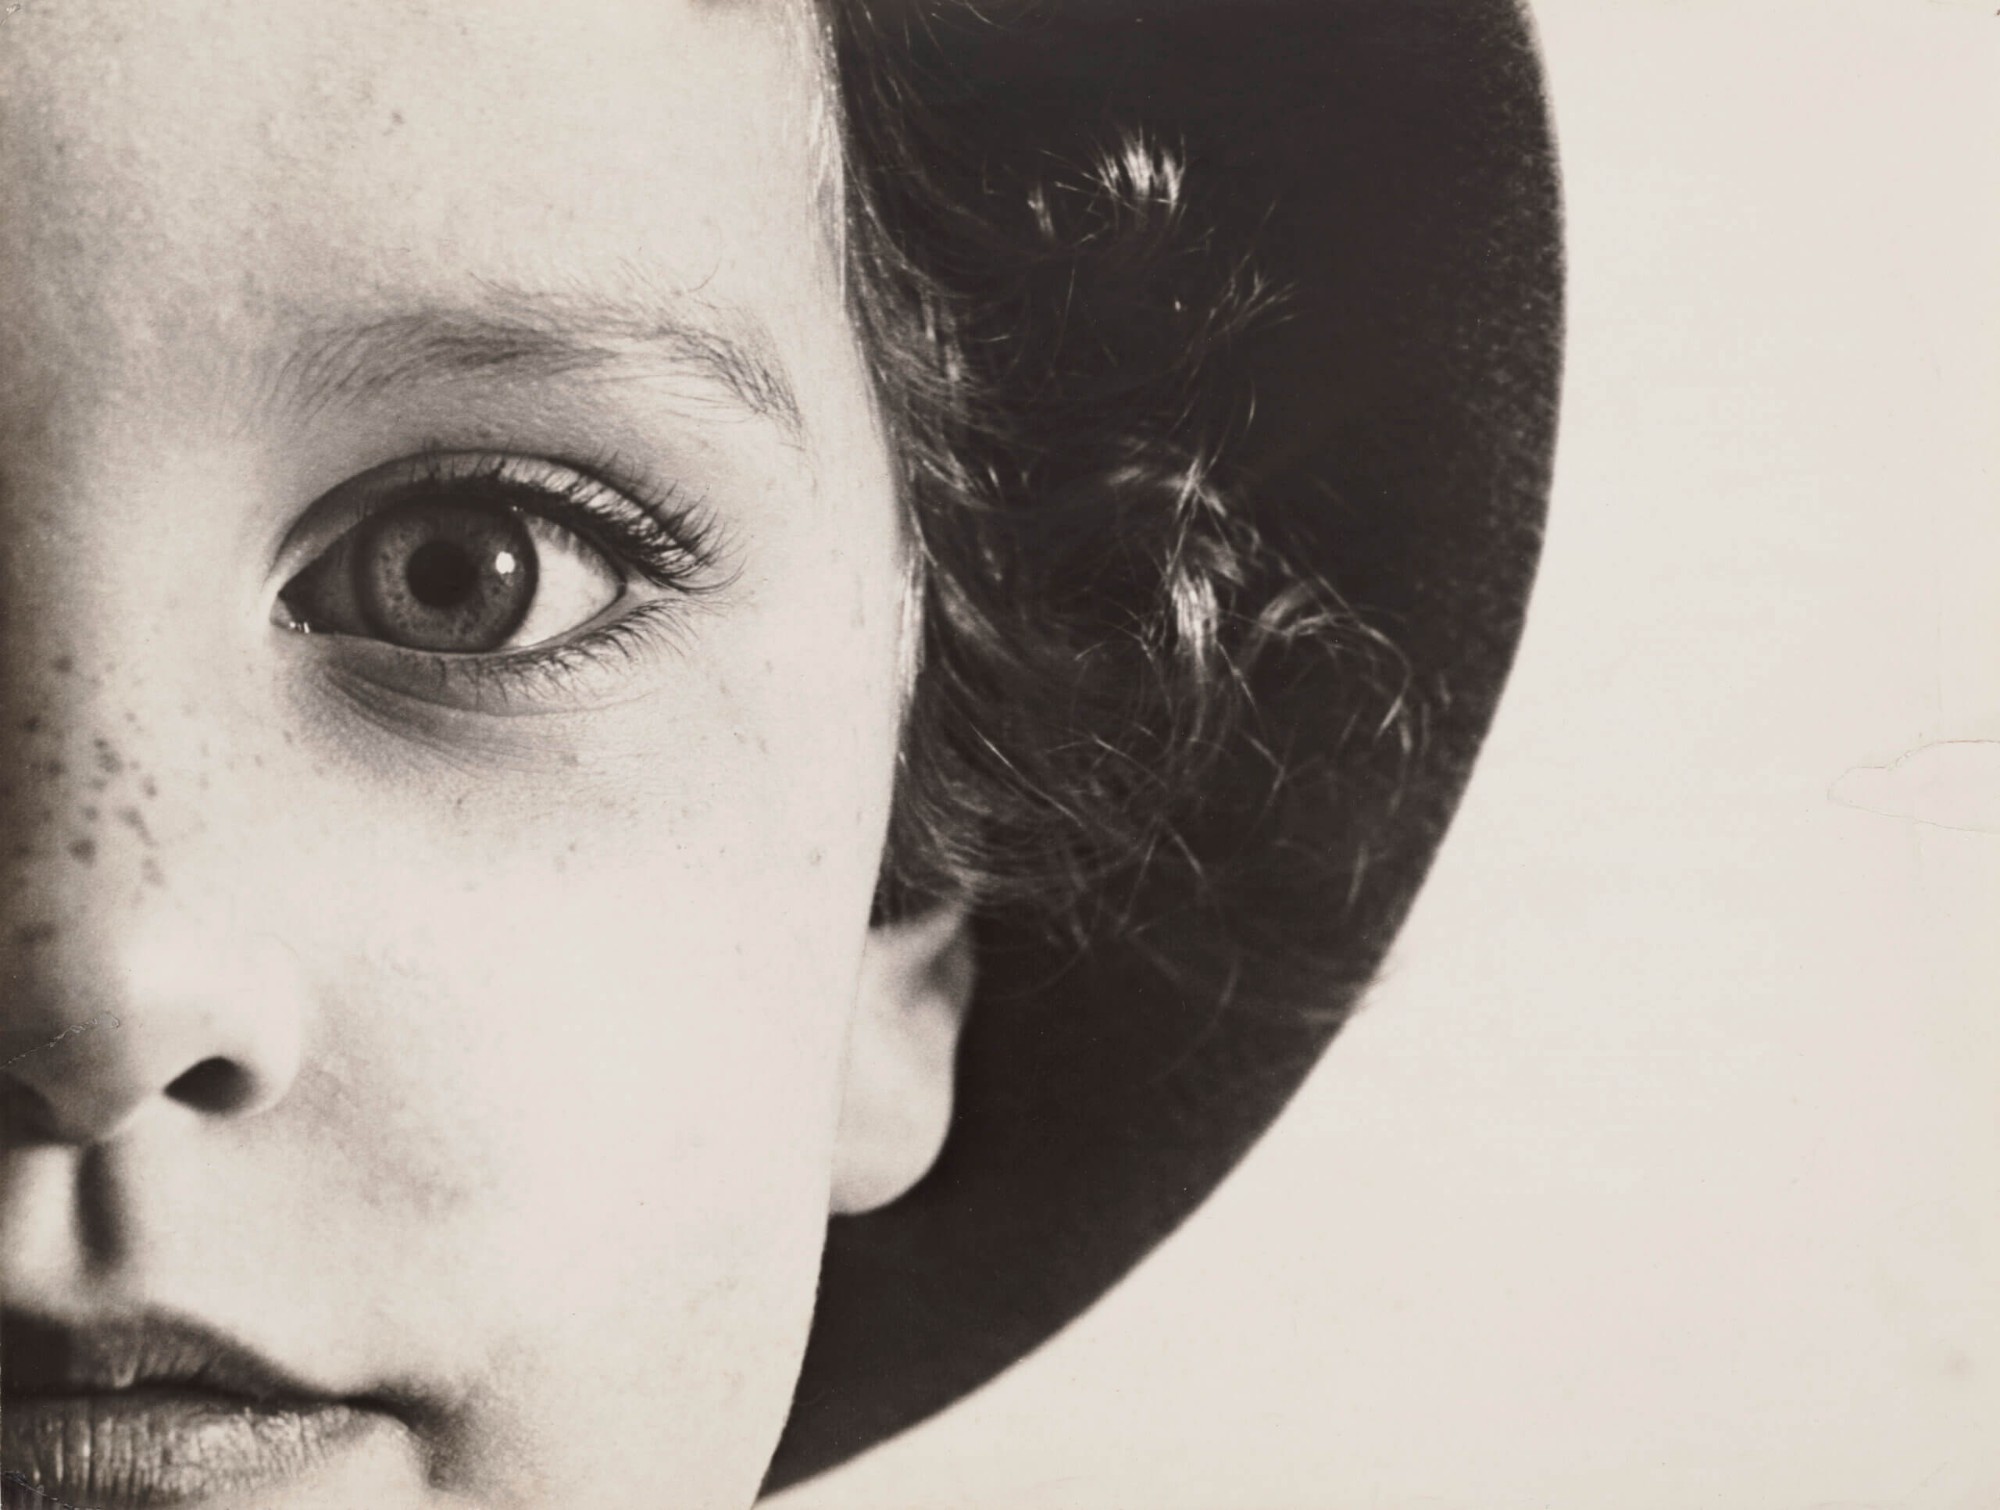 Lotte (Eye), 1928, MAX BURCHARTZ, The Museum of Modern Art, New York, Thomas Walther Collection. Acquired through the generosity of Peter Norton, © 2020, Max Burchartz / Artists Rights Society (ARS), New York / VG Bild-Kunst, Germany Digital Image, © 2019, The Museum of Modern Art, New York Museum of Modern Art, New York